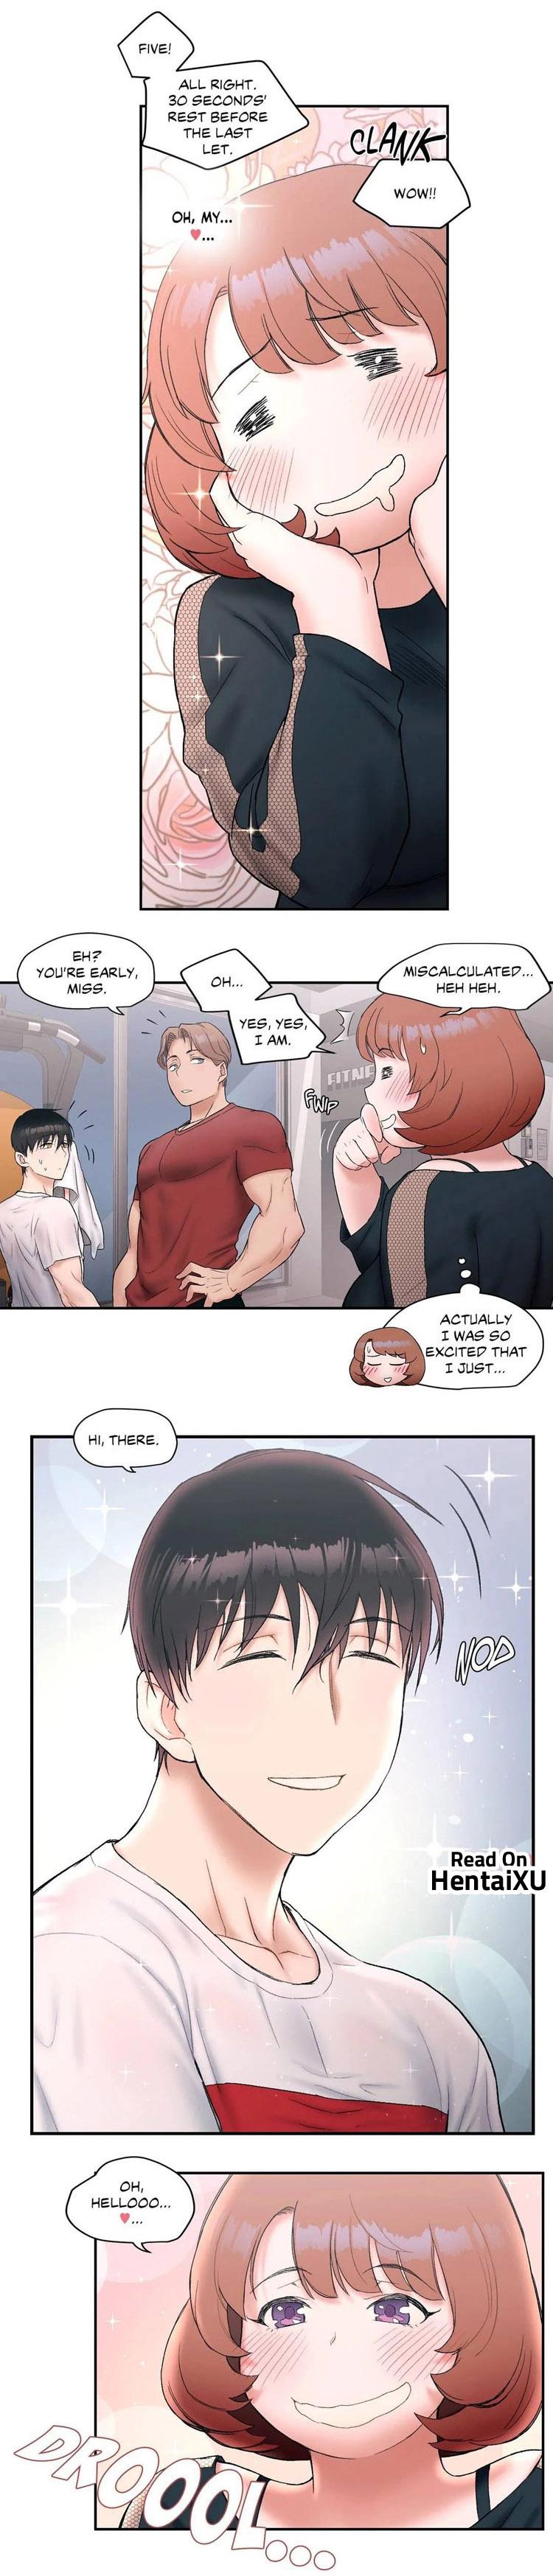 Sexercise Ch.23/? 137